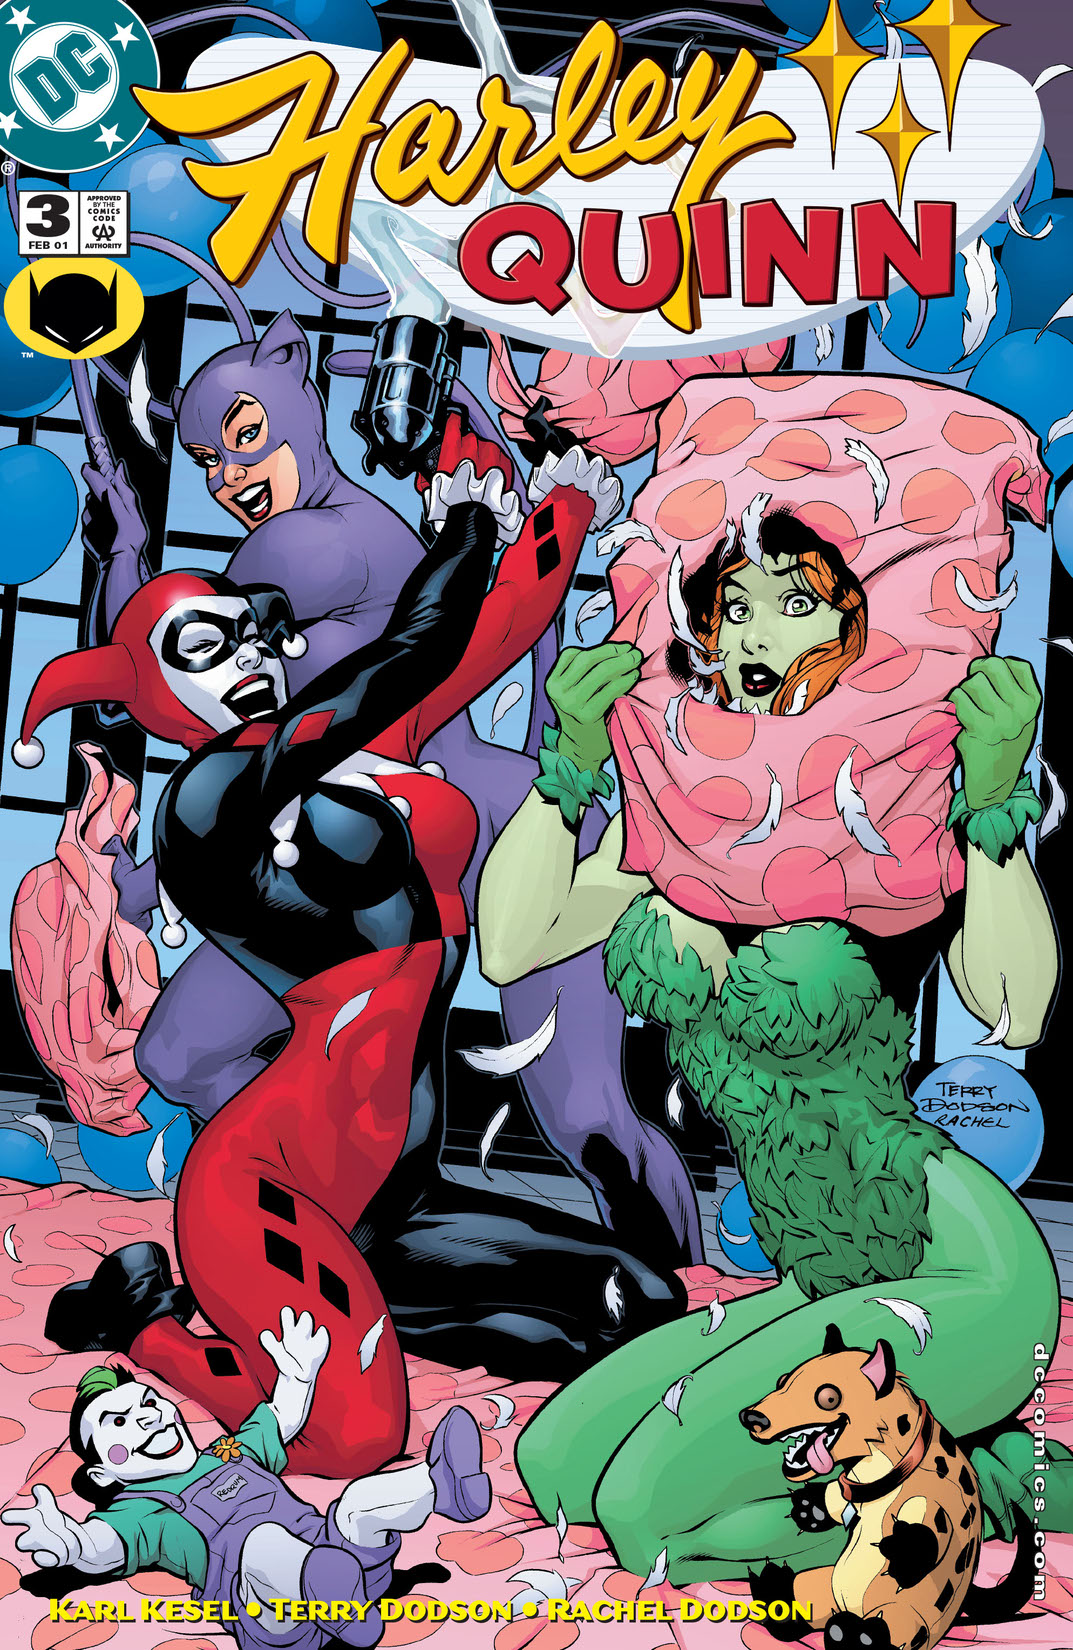 Harley Quinn (2000-) #3 preview images